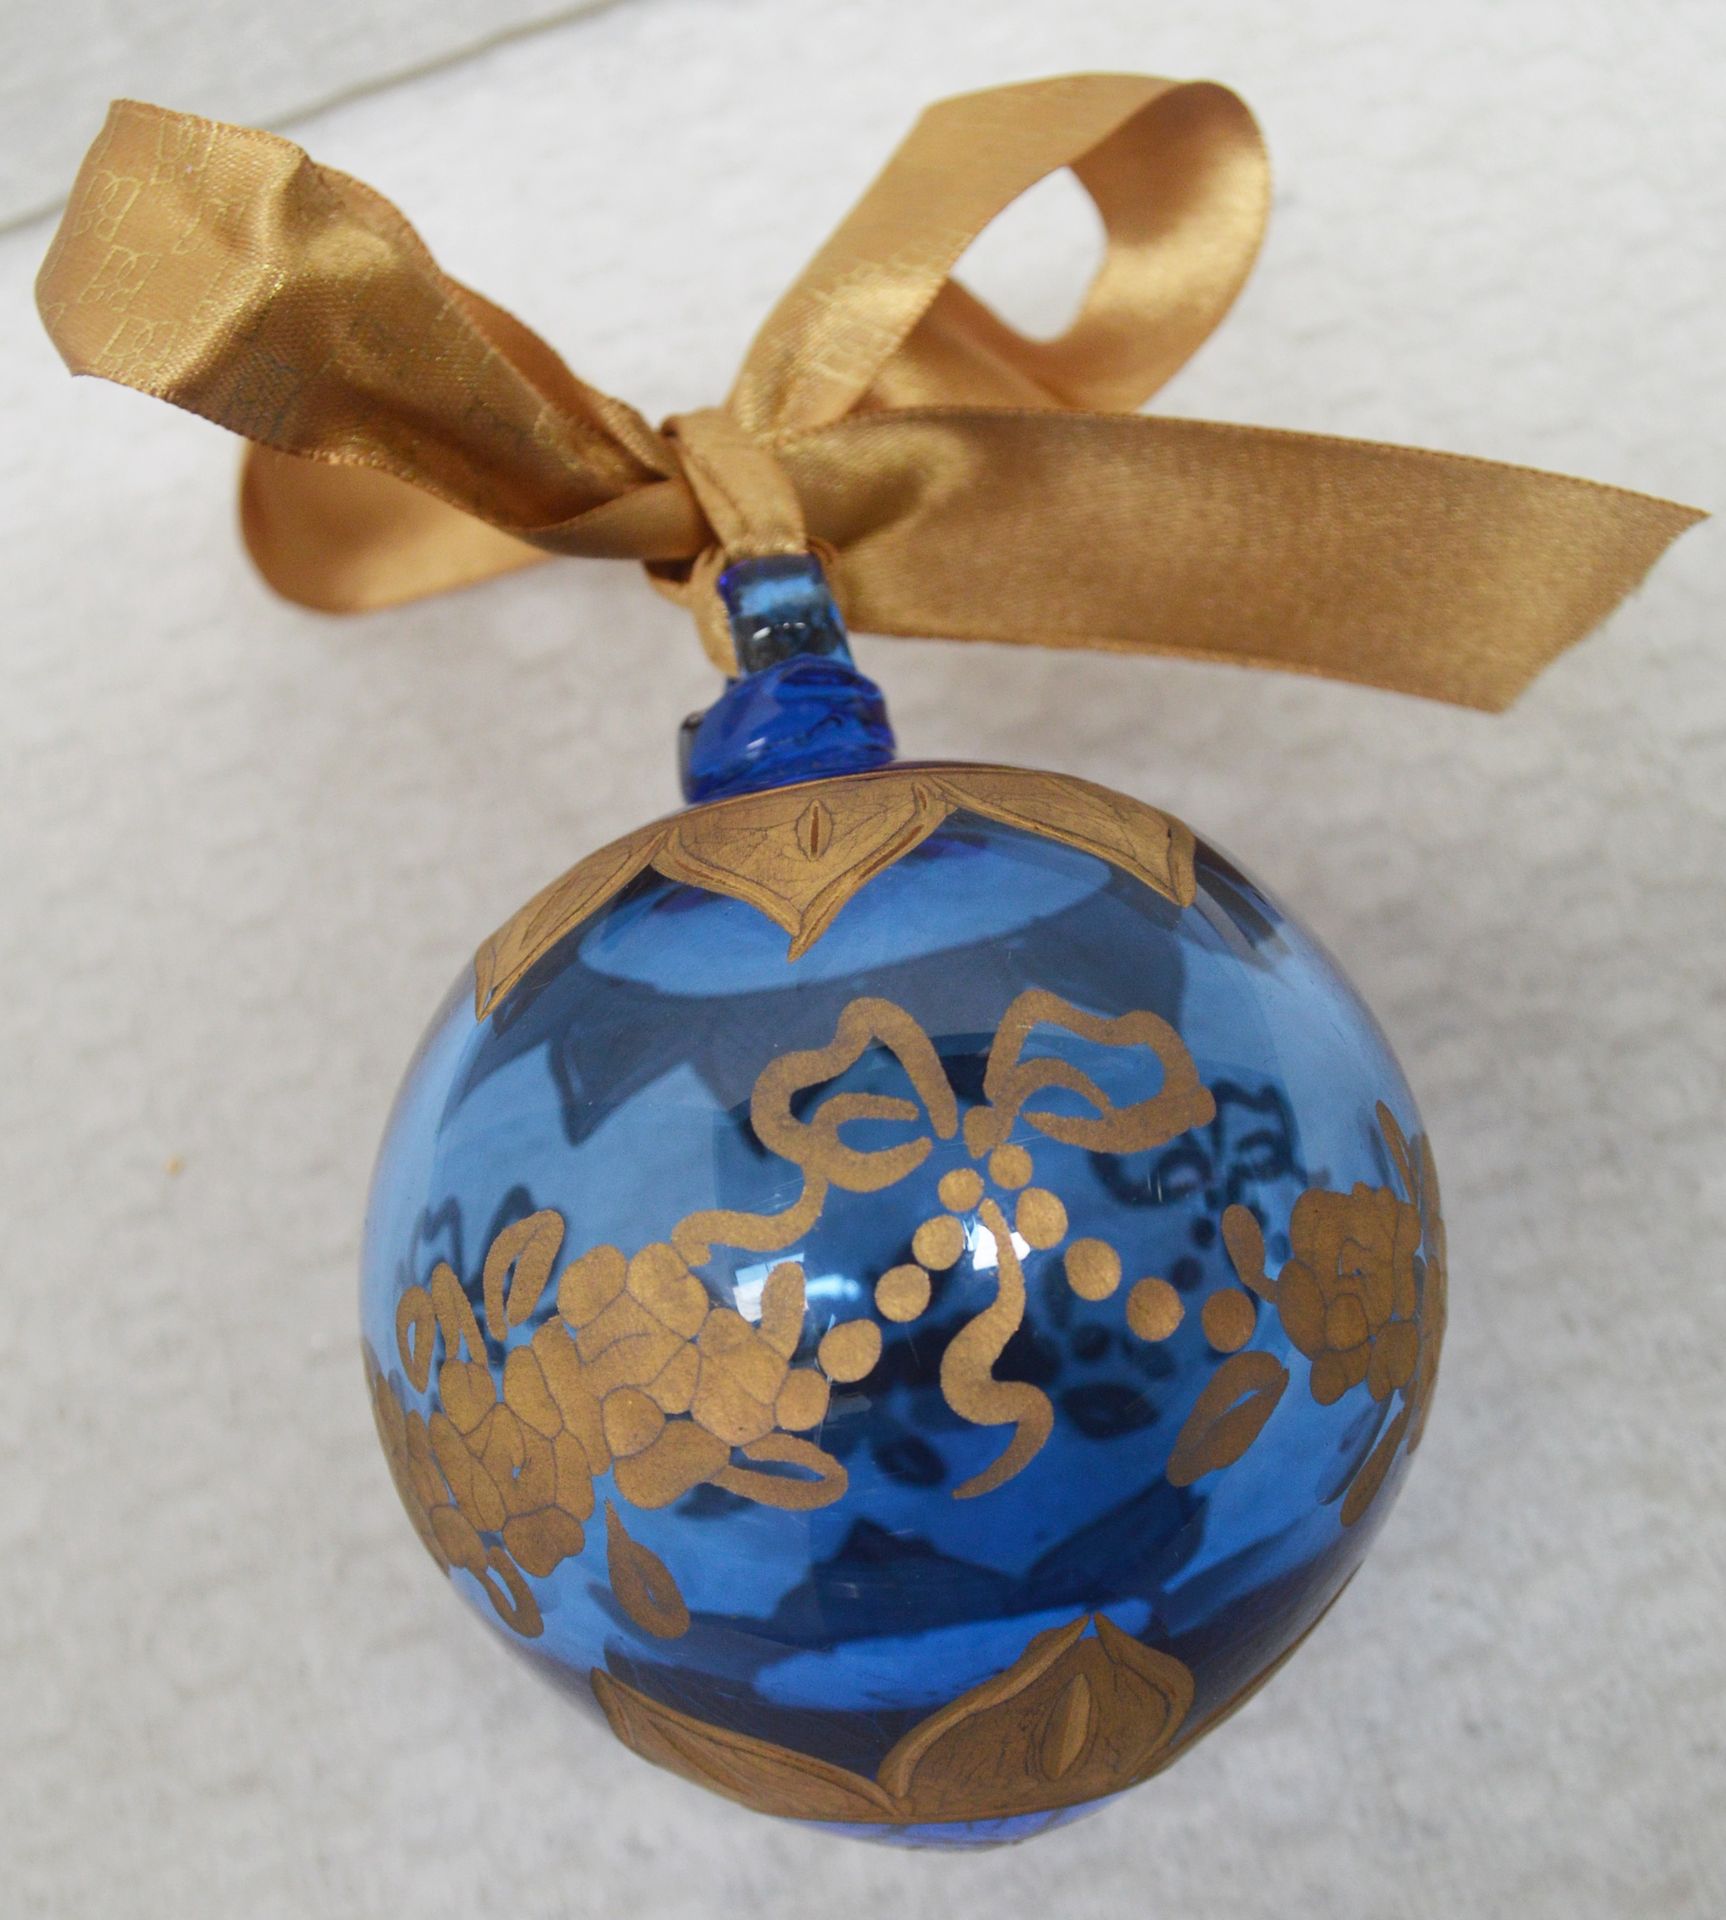 1 x BALDI 'Home Jewels' Italian Hand-crafted Artisan Glass Christmas Tree Decoration In Blue & Gold